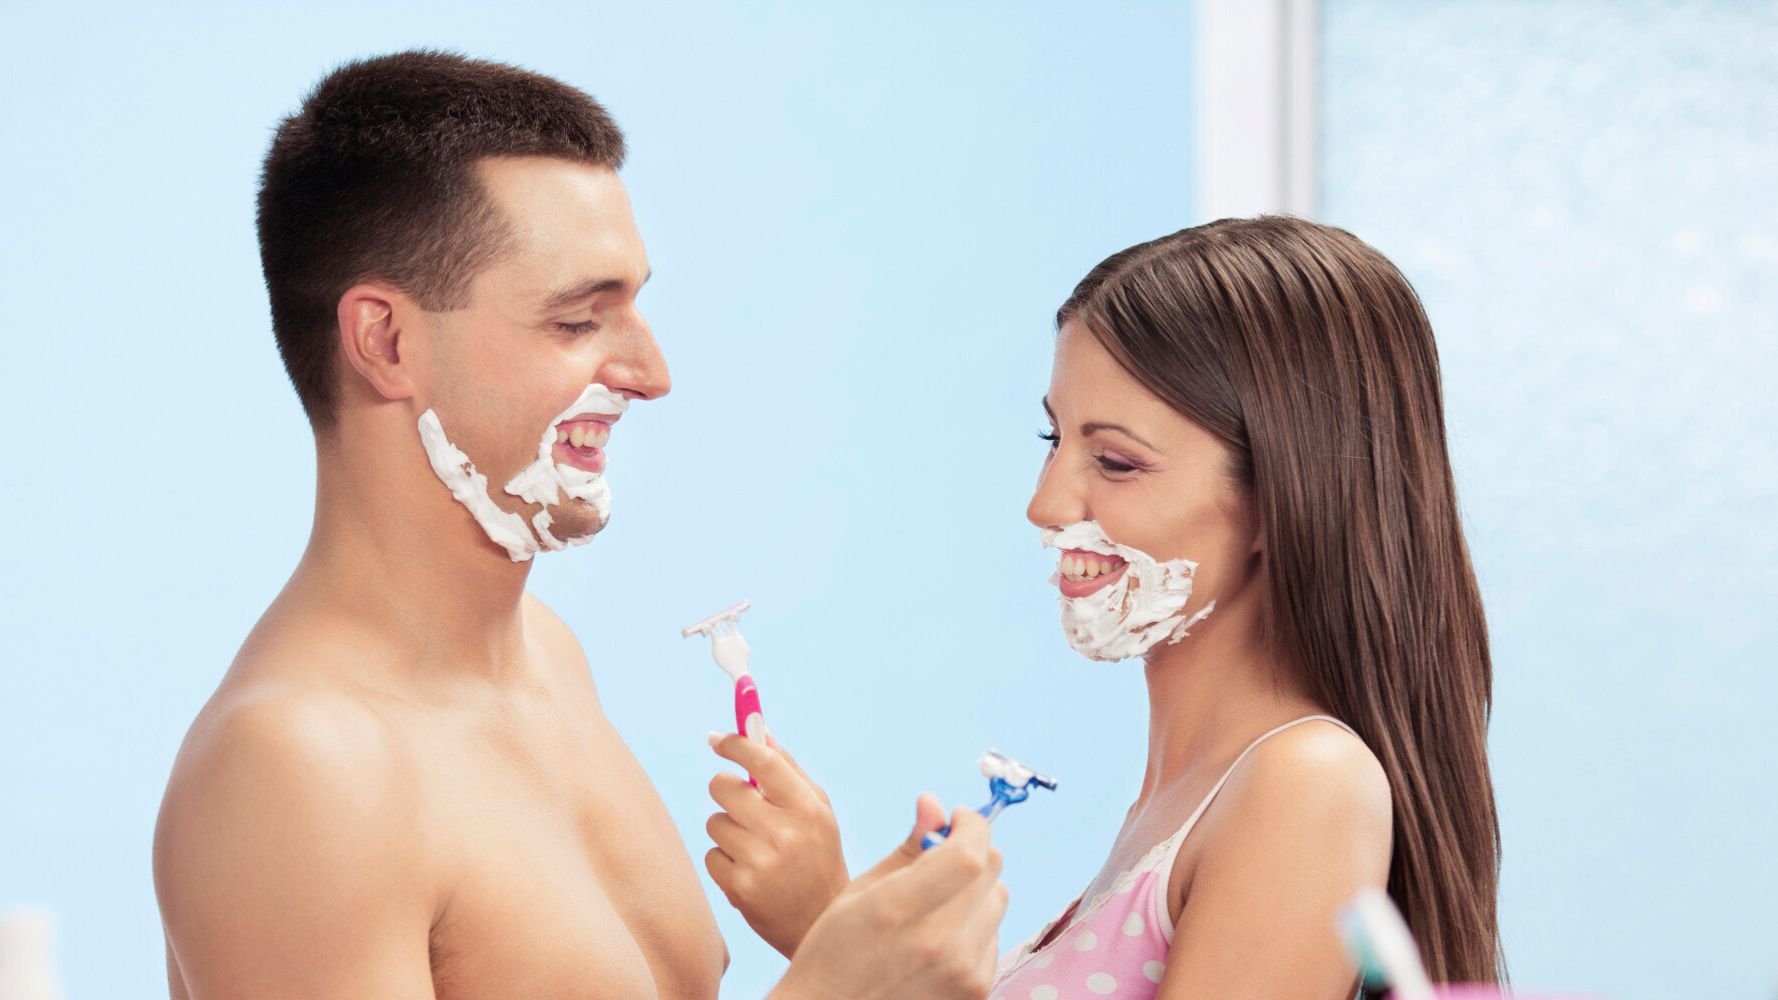 Should A Woman Ever Shave Her Face? Beauty Experts Say It Could Be The ...